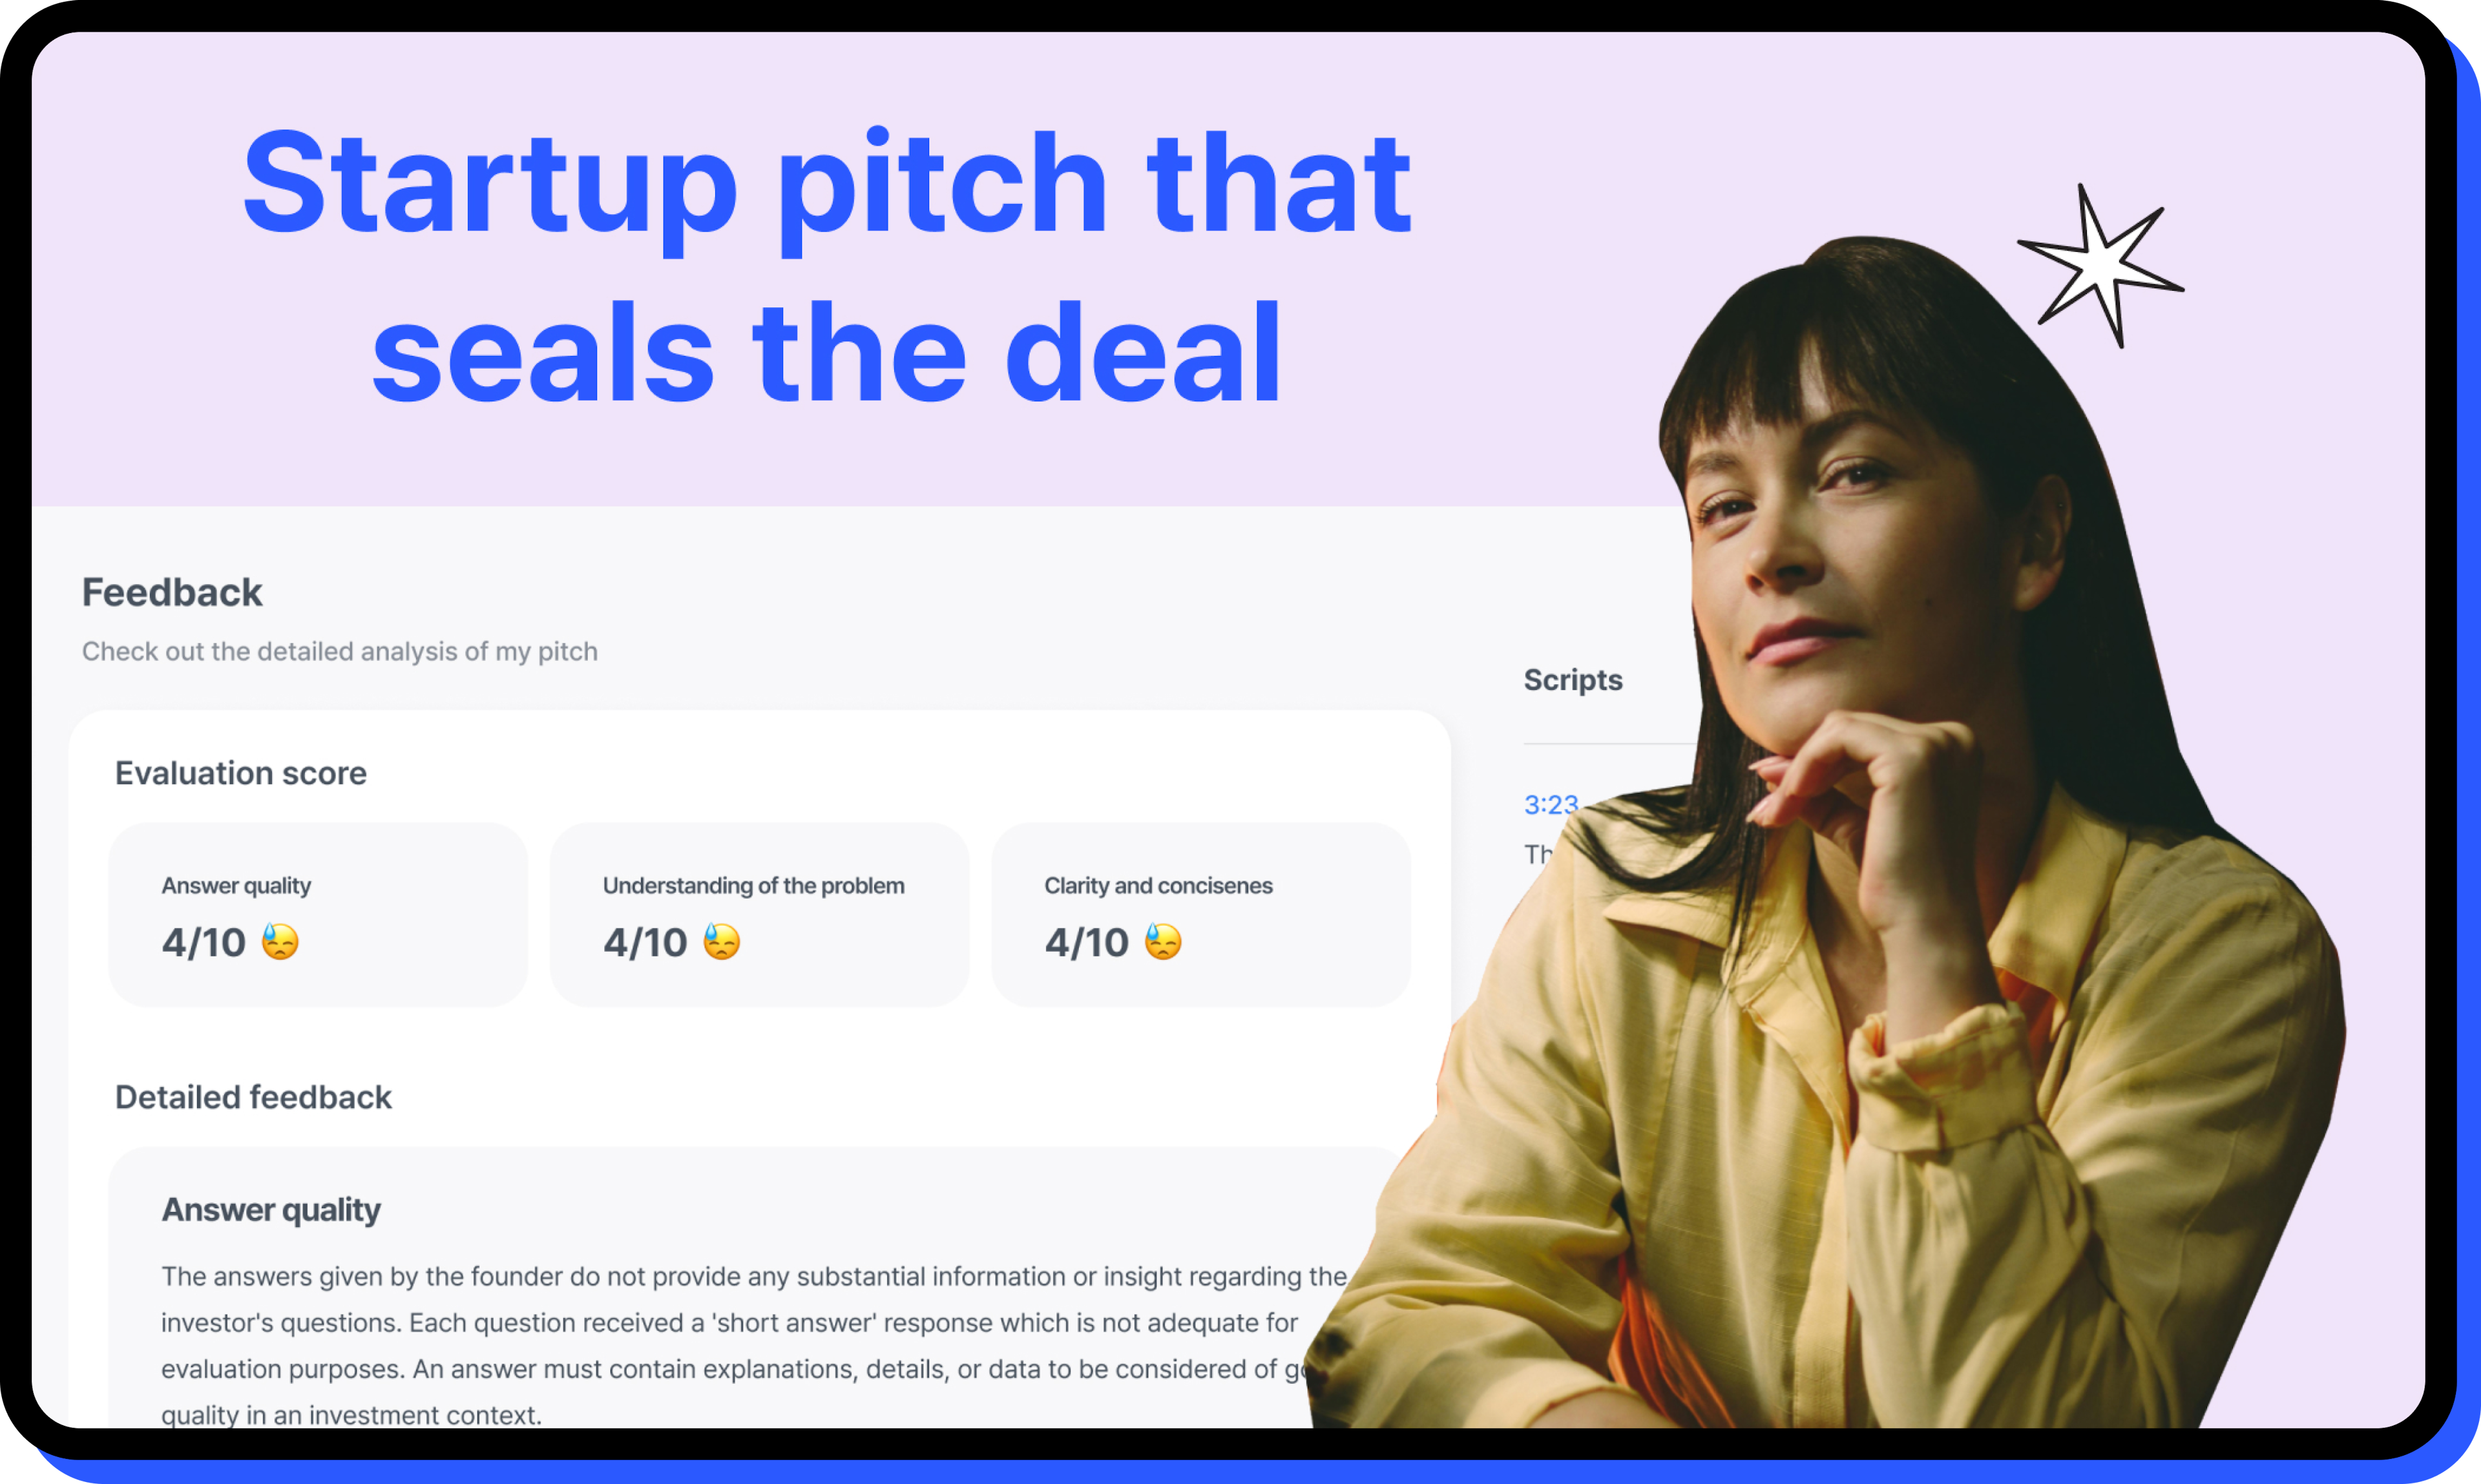 Startup pitch that seals the deal